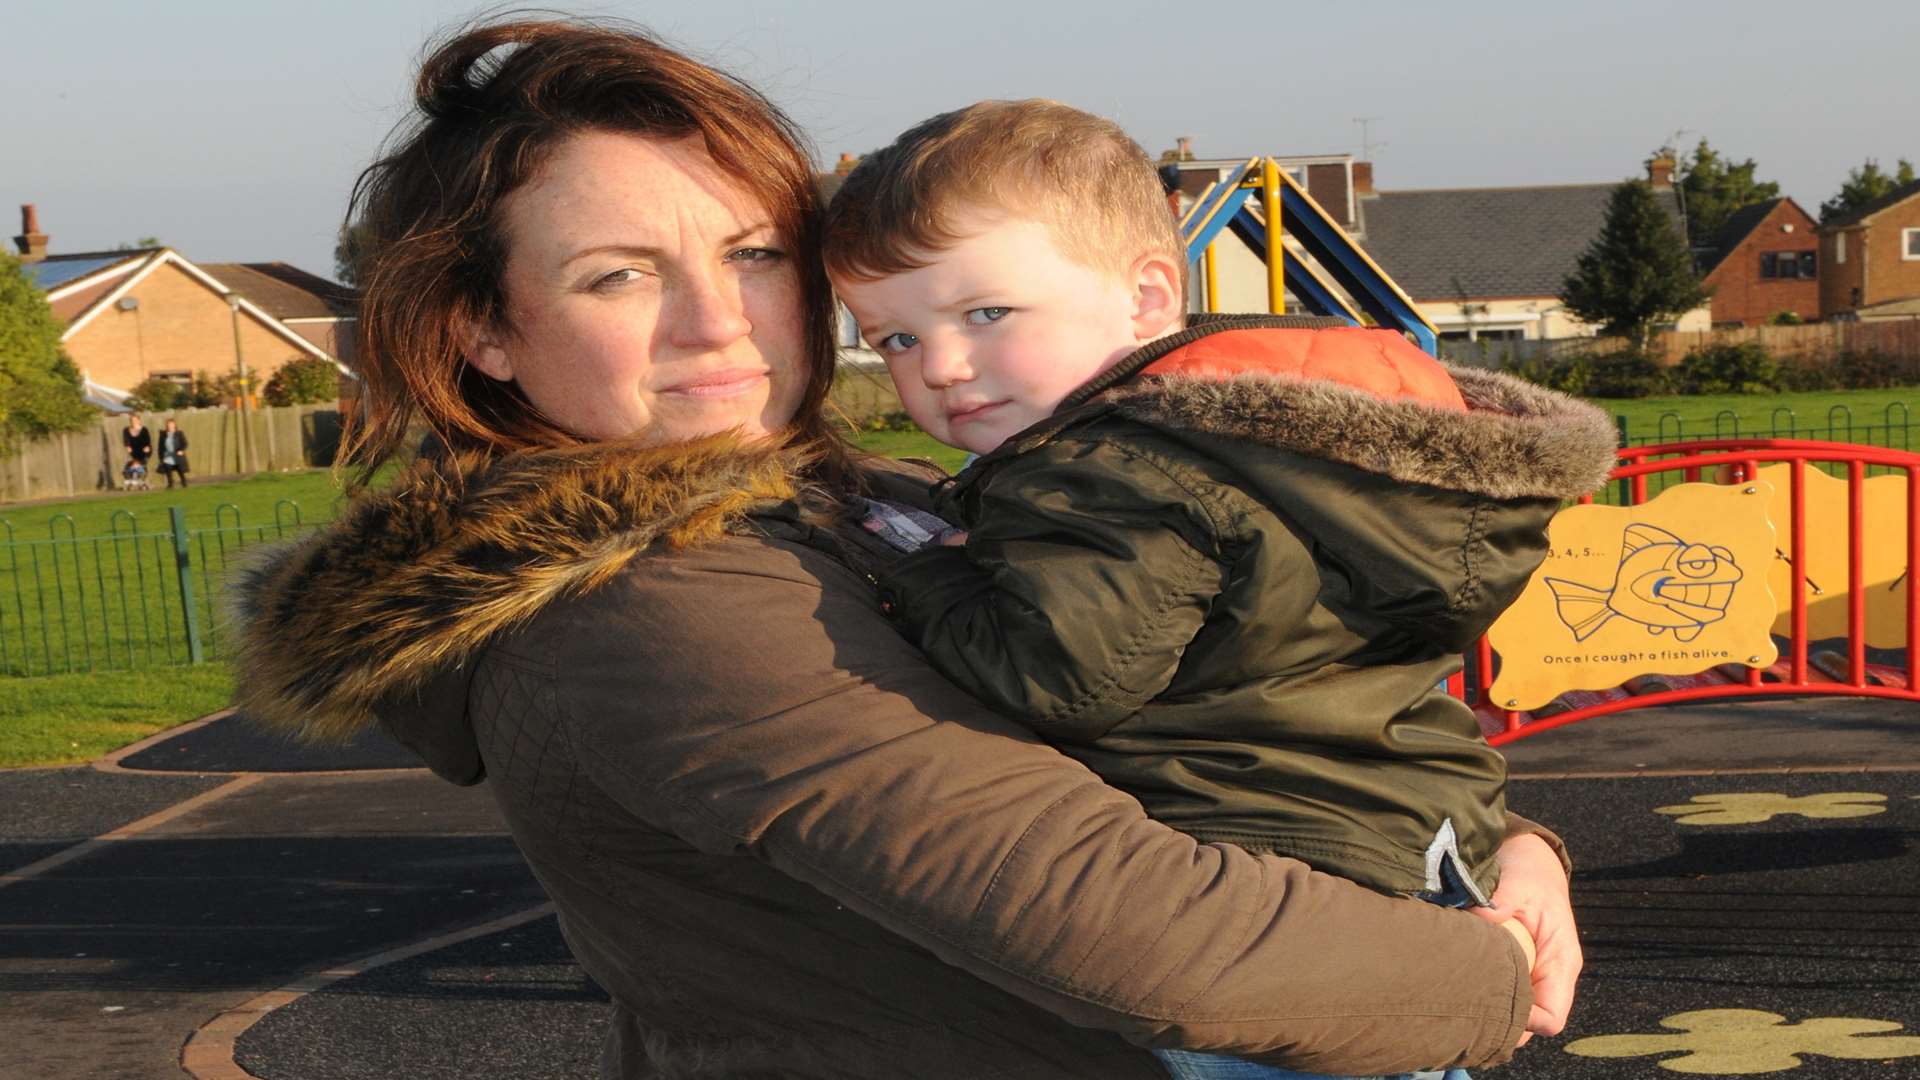 Rachel Elphick and Harrison Milliner are worried about using the playground